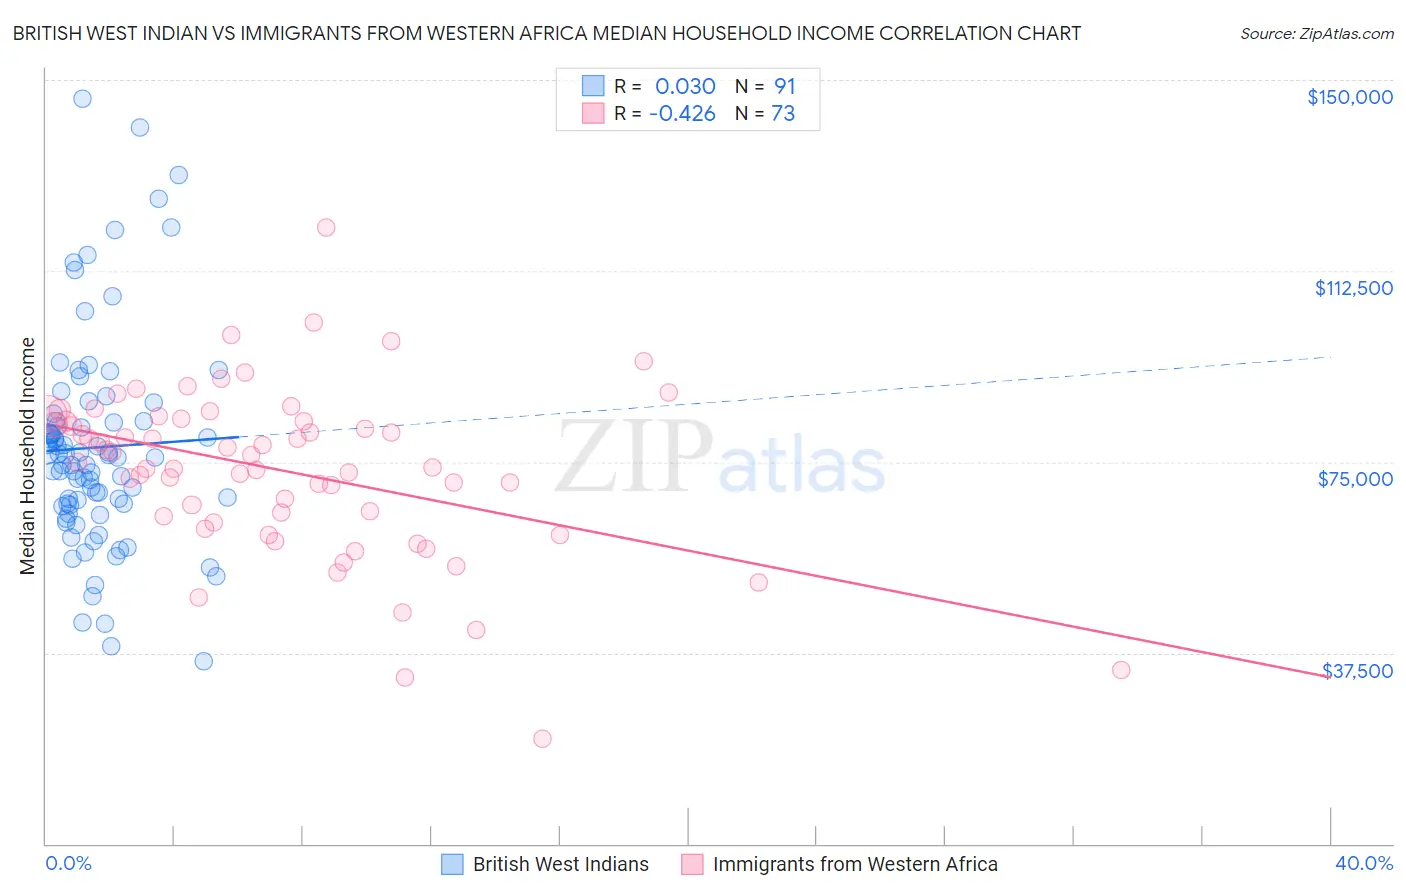 British West Indian vs Immigrants from Western Africa Median Household Income